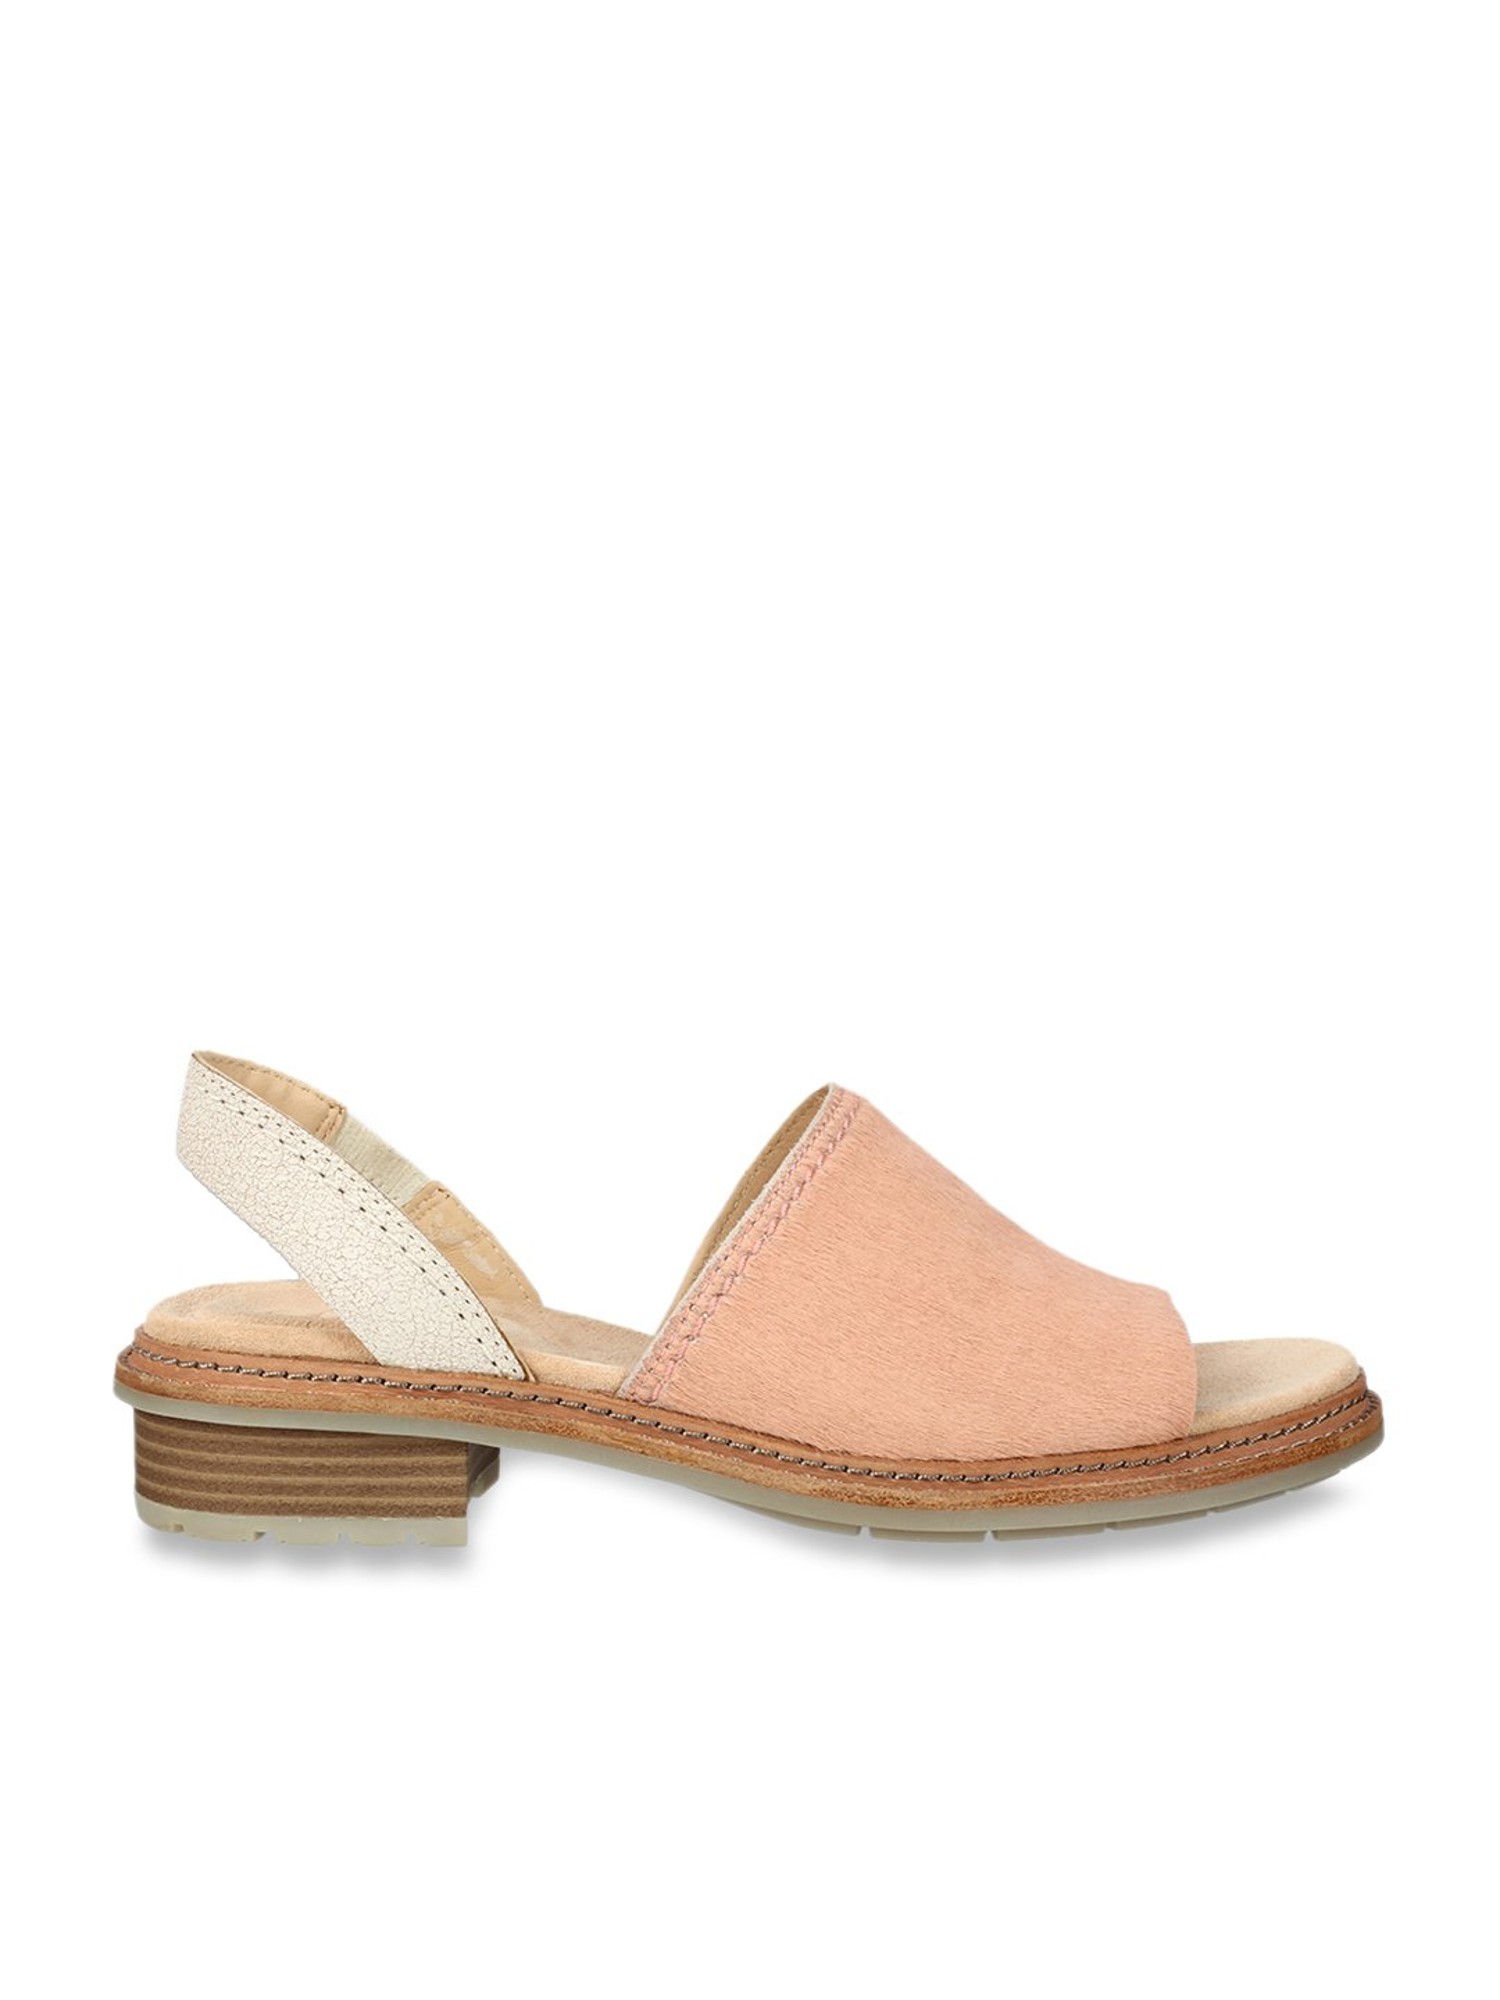 Buy Clarks Trace Stitch Pink Sling Back Sandals for Women at Best Price @ Tata CLiQ